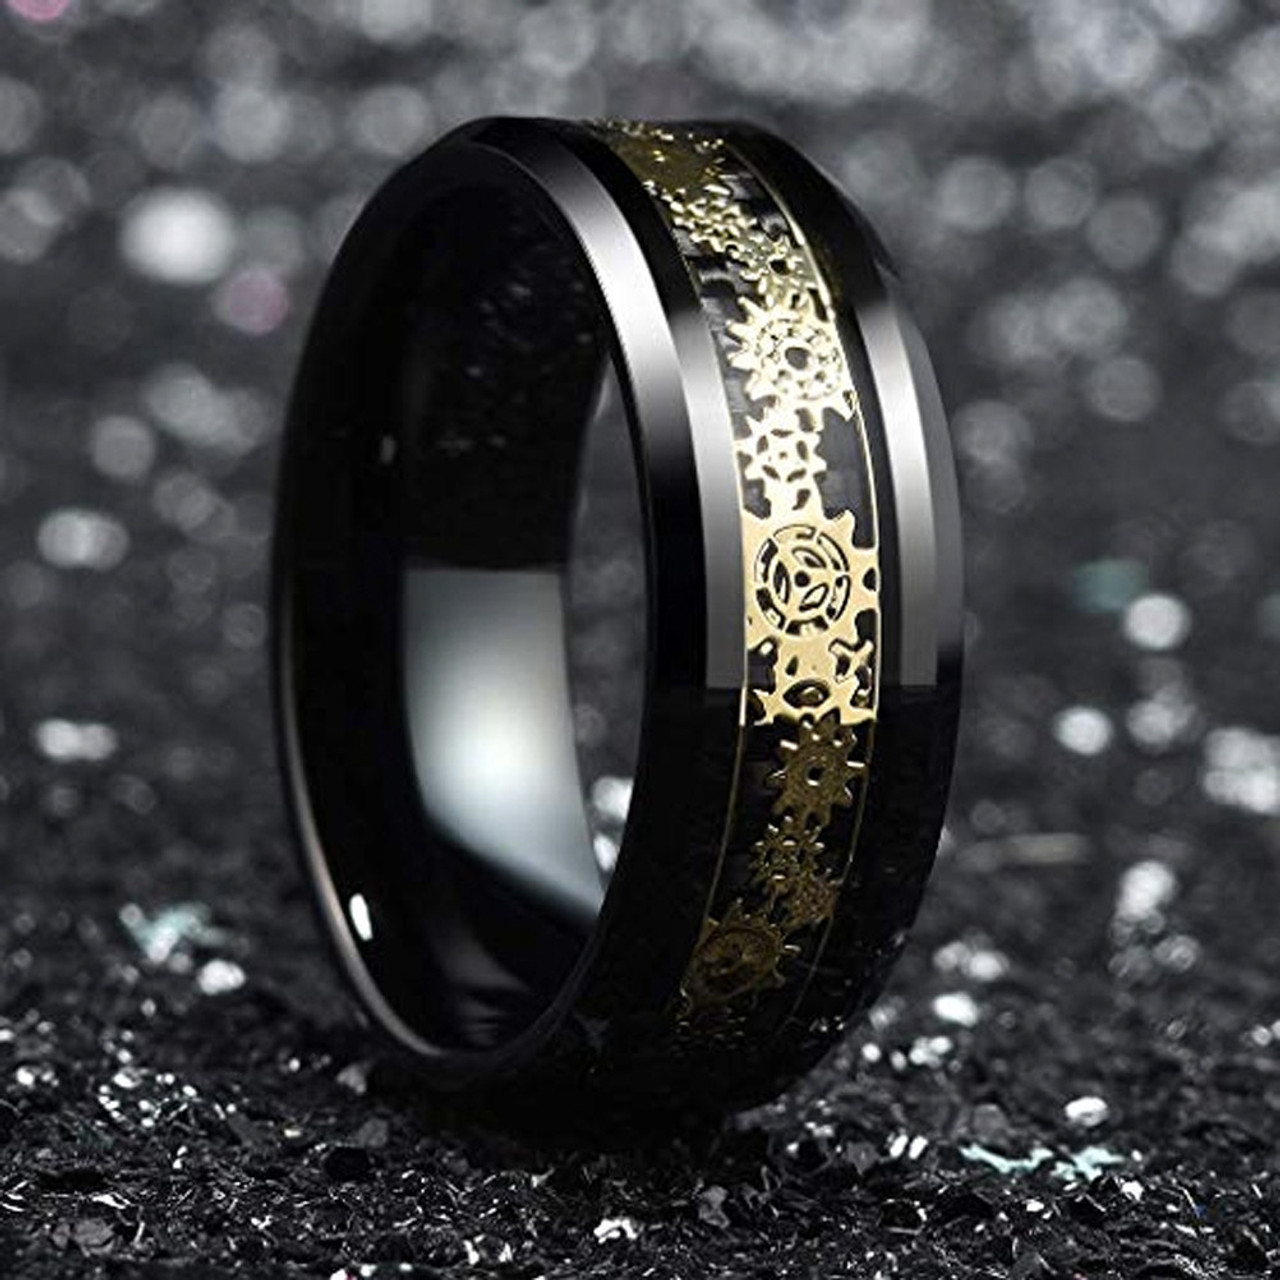 Men's Tungsten Wedding Band (8mm). Wedding Band Black with Gold Mechanical Gears Over Black Carbon Fiber. Tungsten Carbide Ring